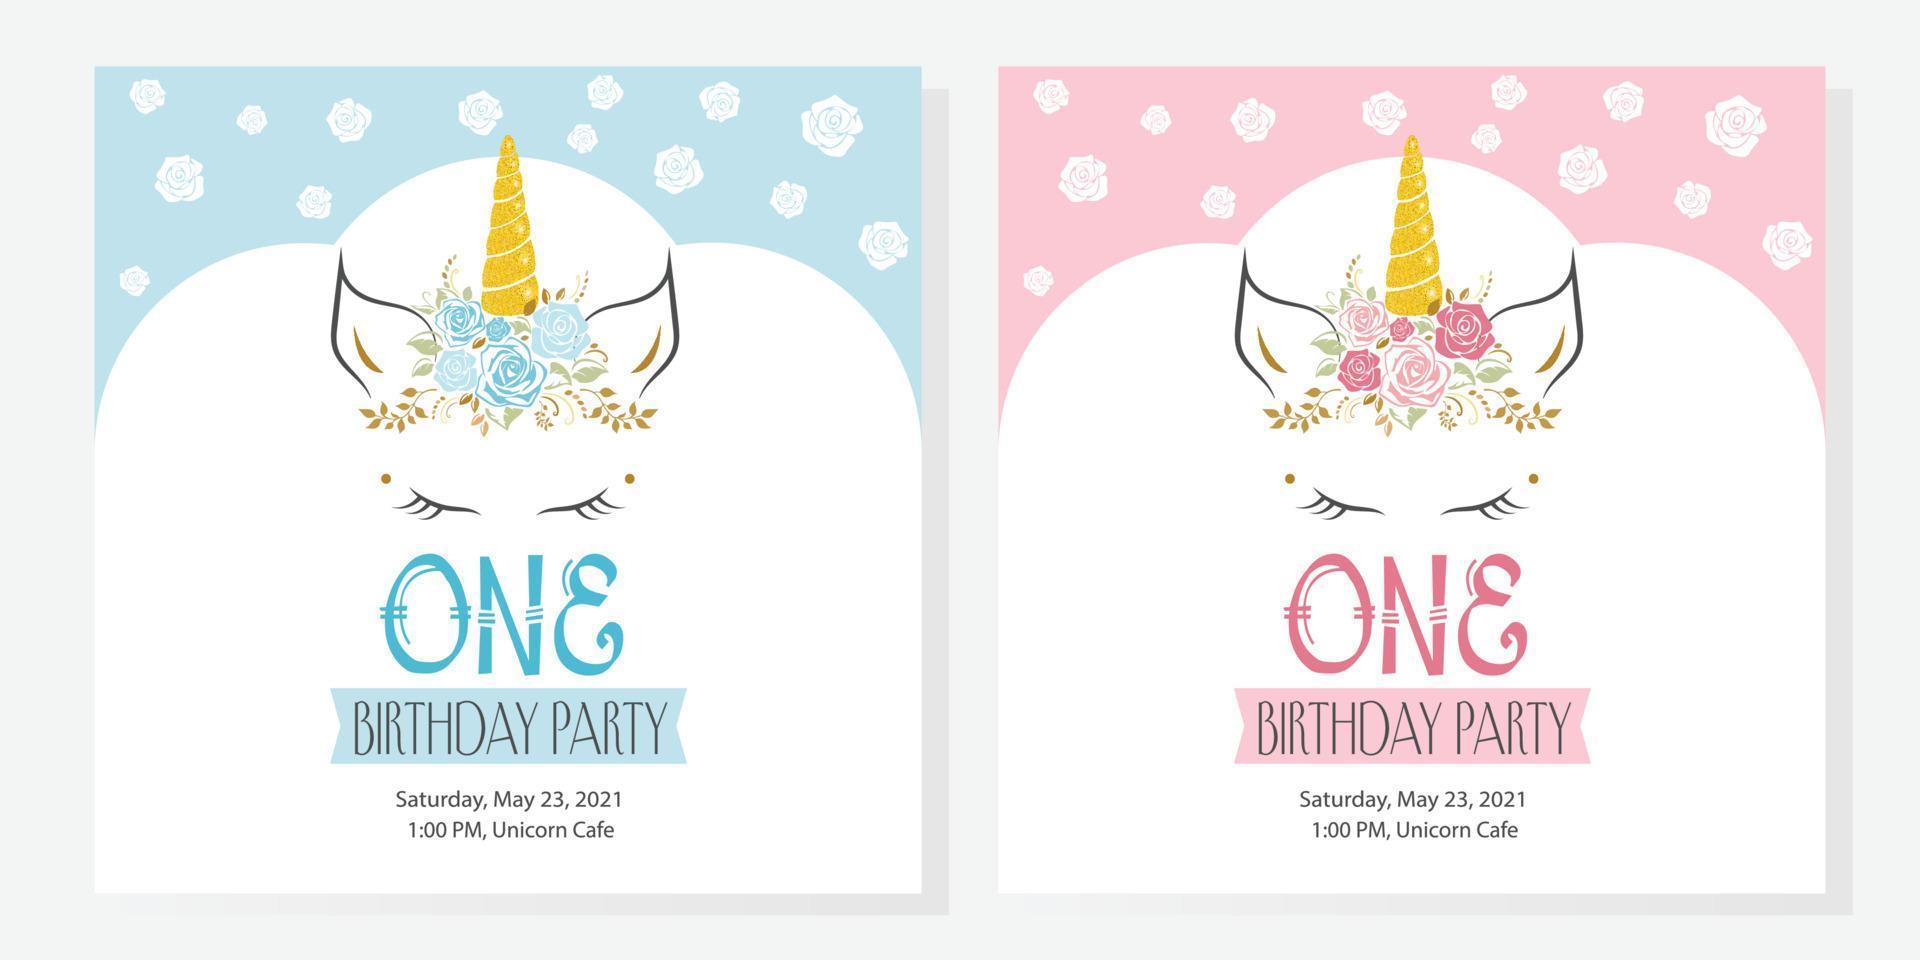 Cute unicorn face with a flower on blue and pink colors. Cute children's birthday invitation. Unicorn head. Vector illustration